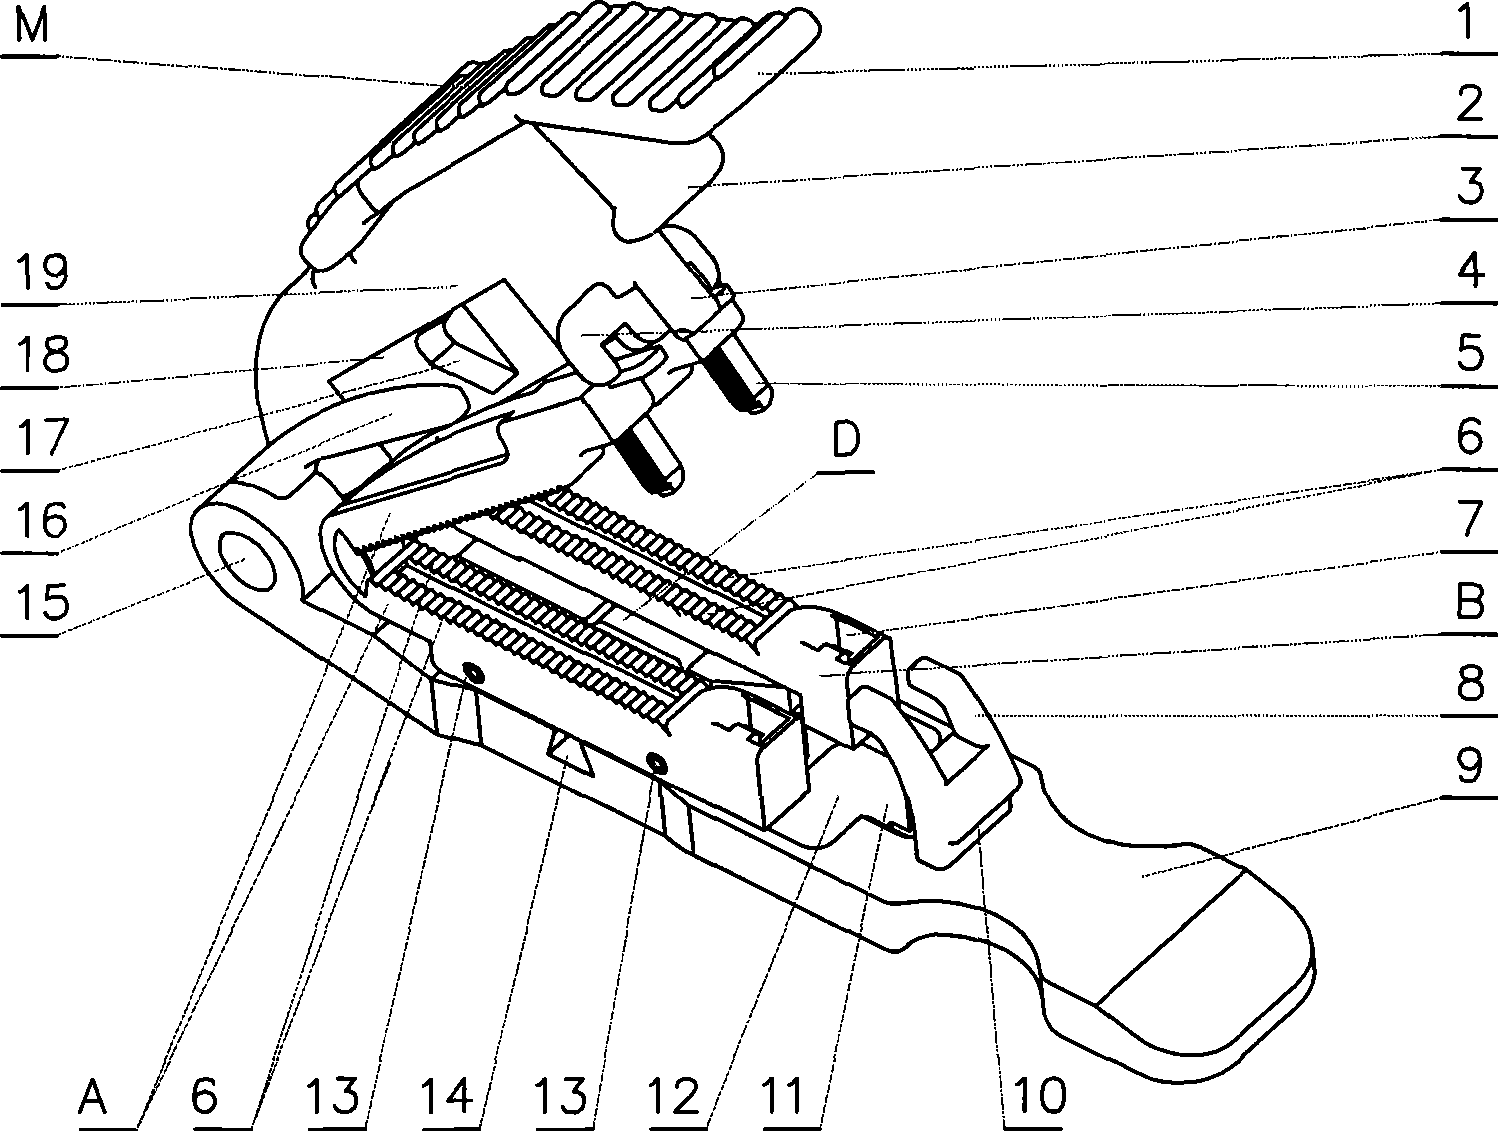 Disposal bidirectional navel cord cutting and protecting device